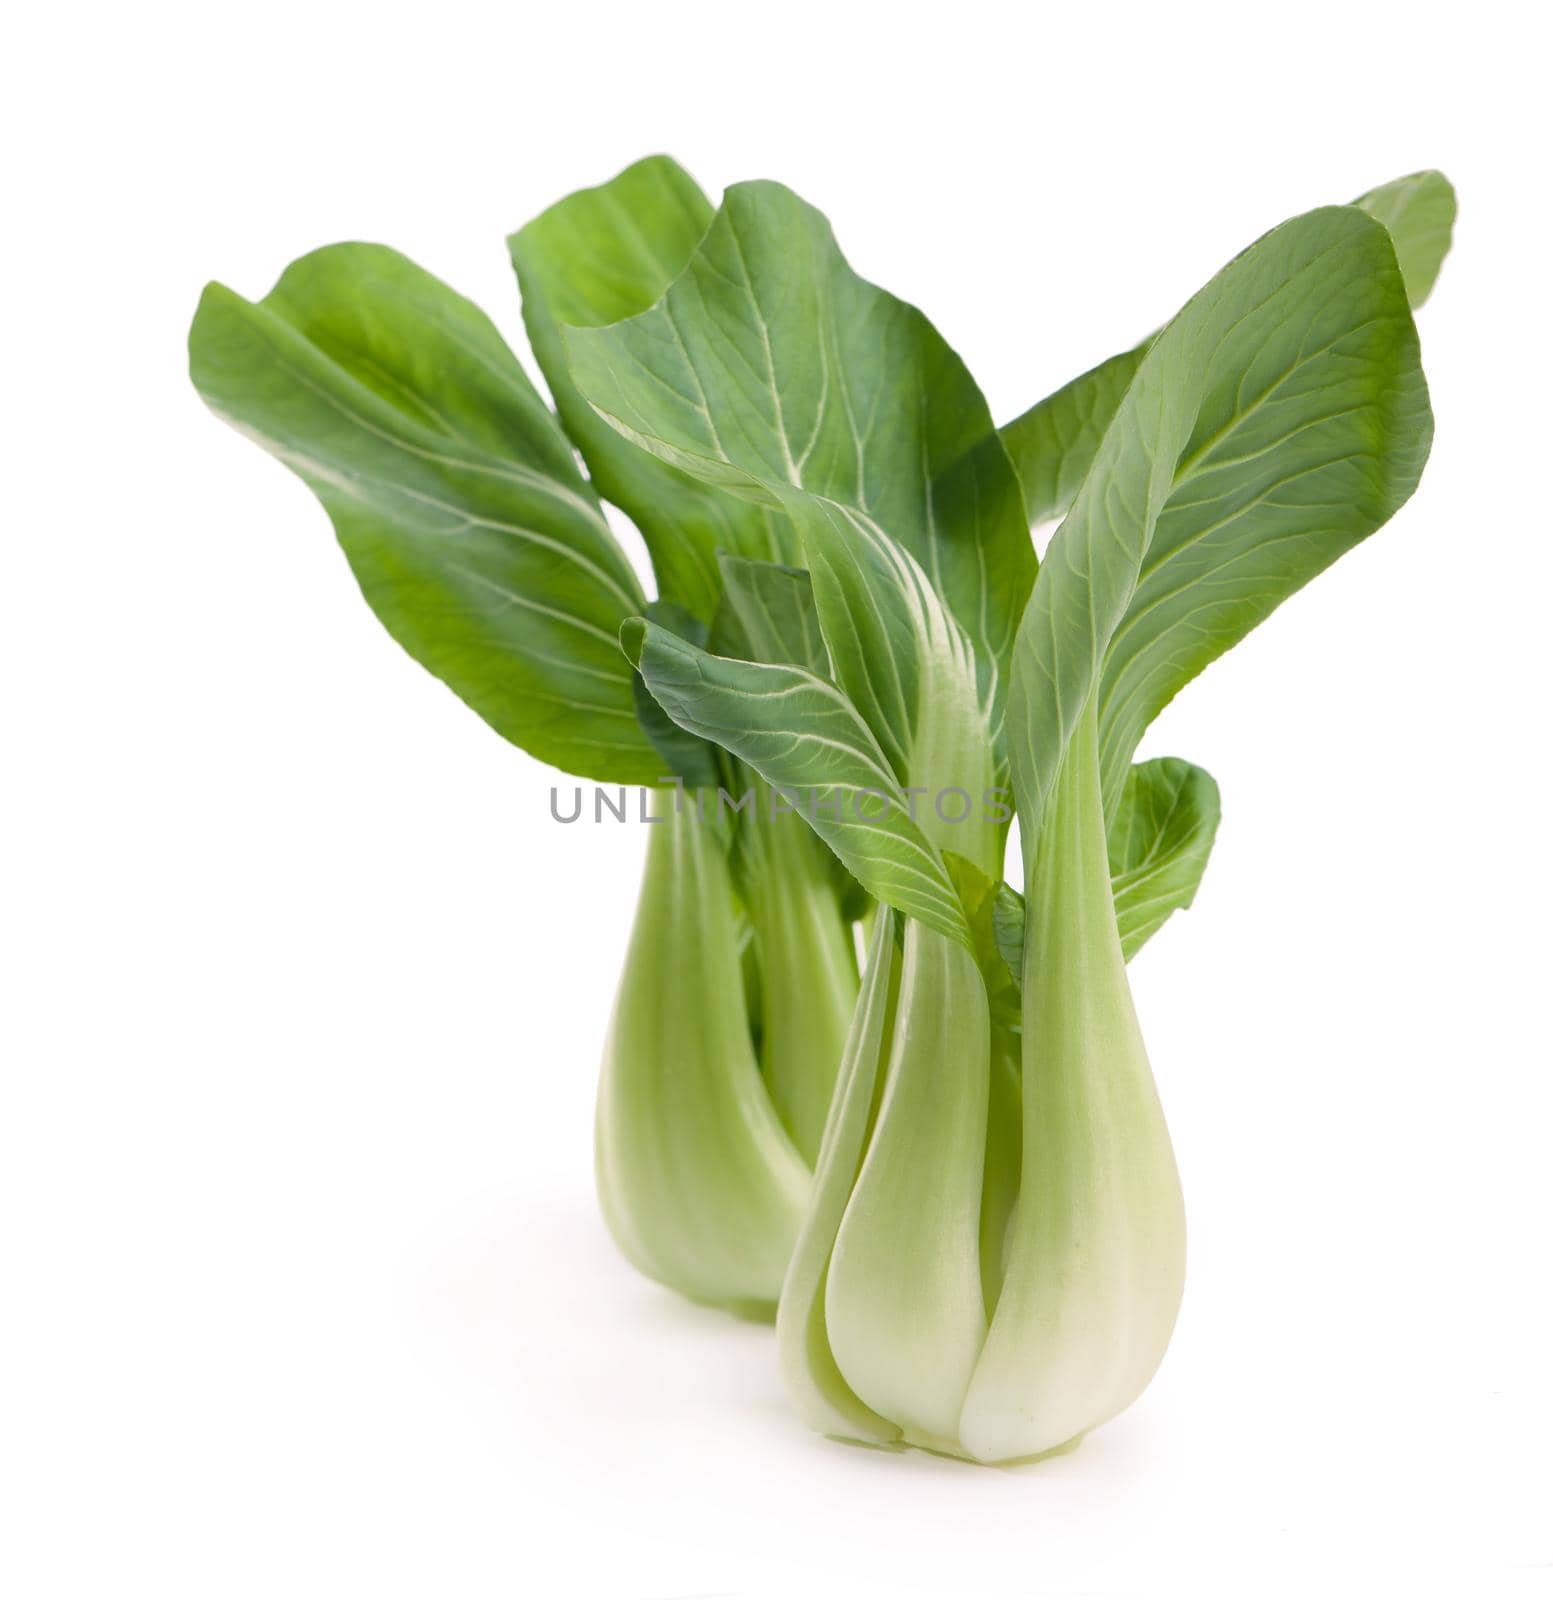 Chinese cabbage. Bok choy vegetable on white background by aprilphoto